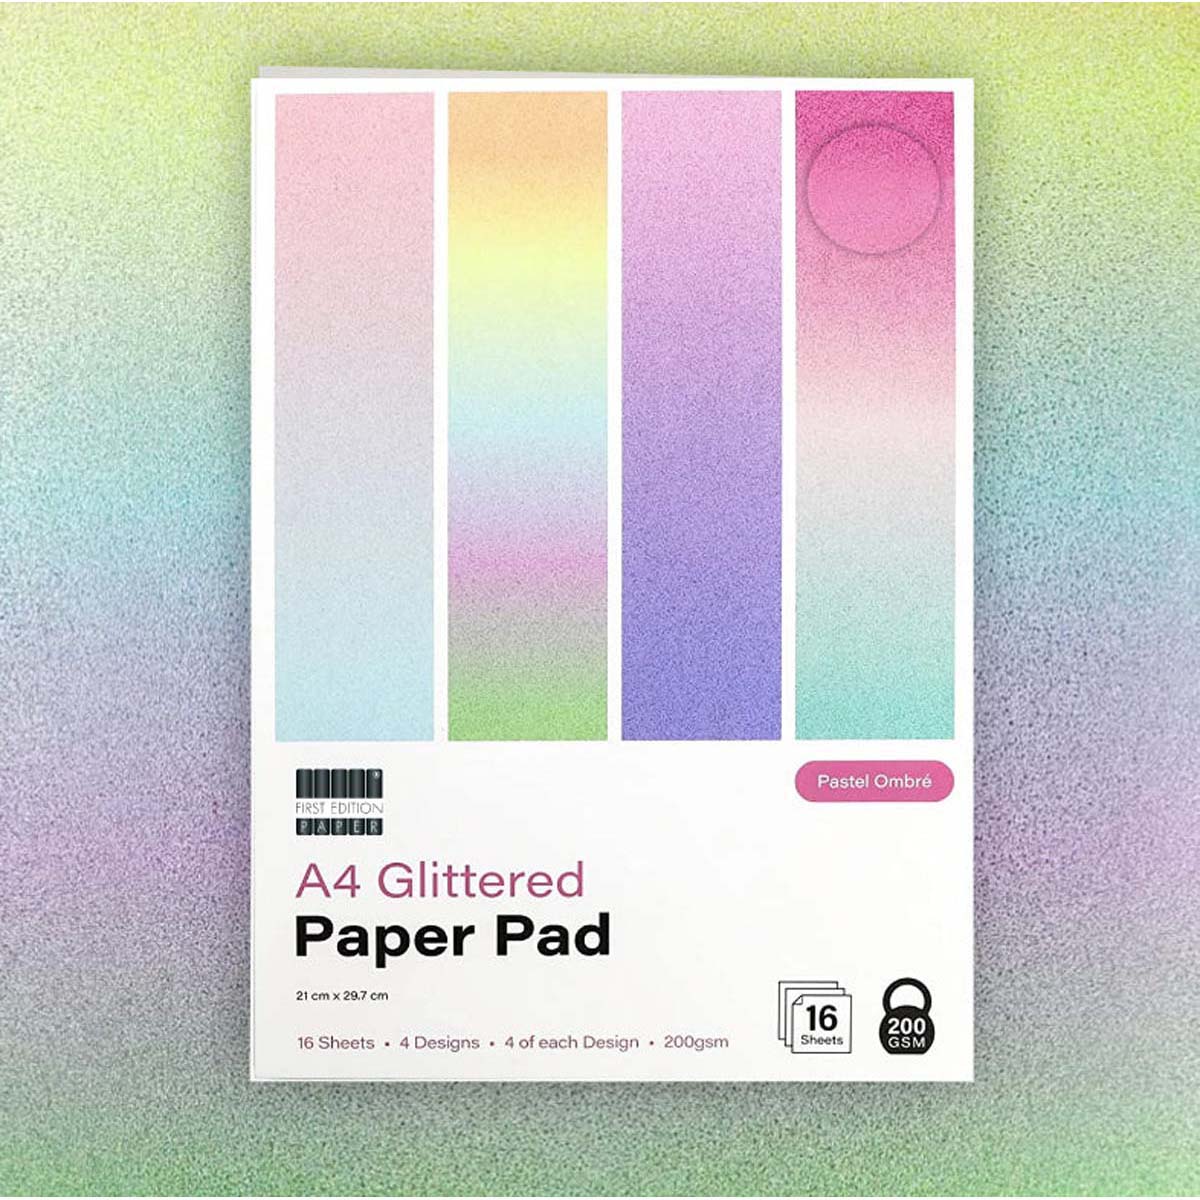 First Edition - A4 Glittered Paper Pad Pastel Ombre